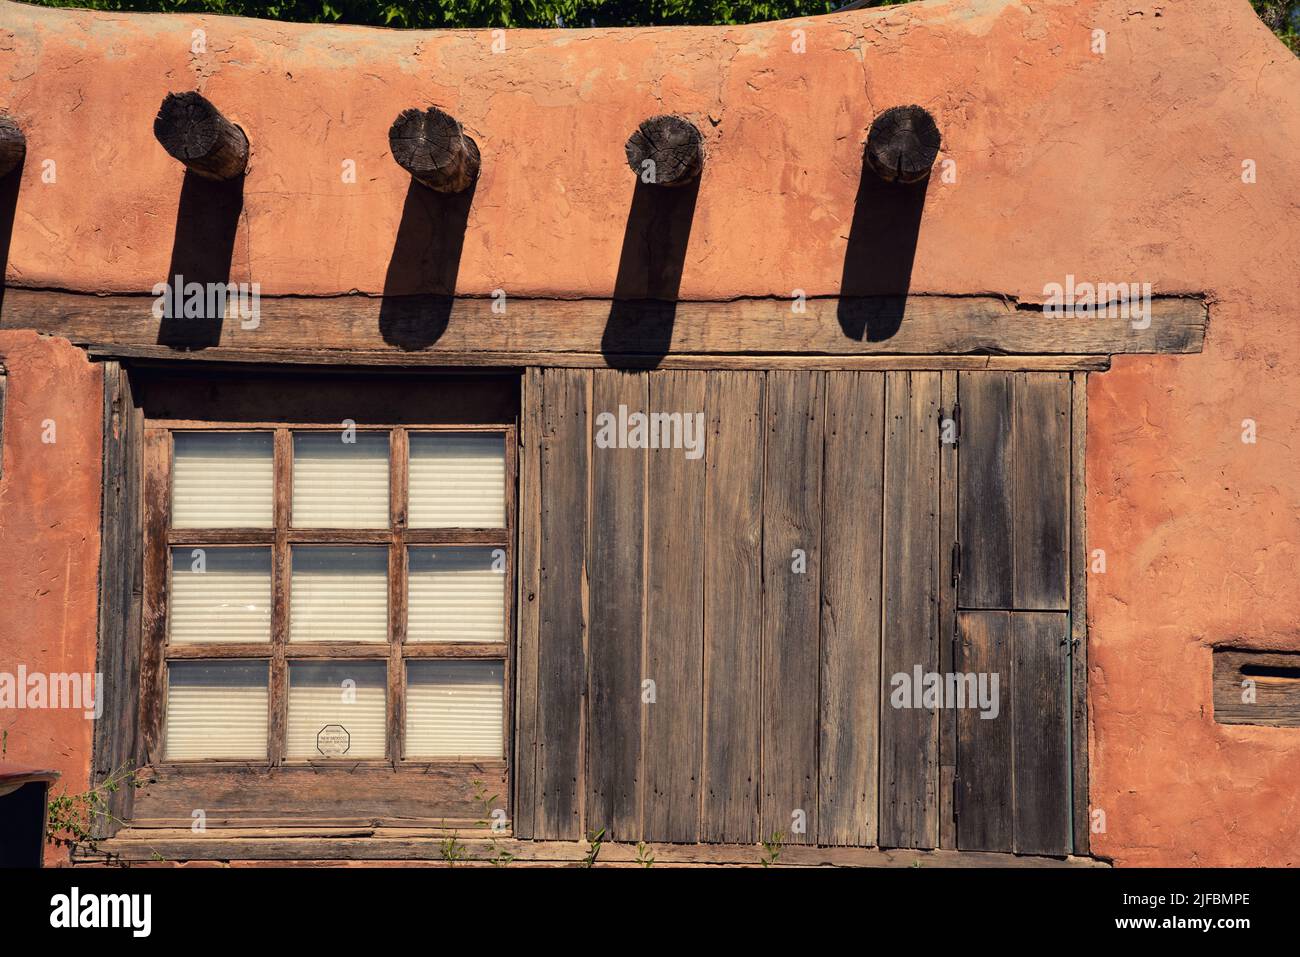 Exterior reddish brown adobe wall of a territorial style house, with vigas protruding and wooden frame paned windows in Santa Fe, New Mexico. Stock Photo